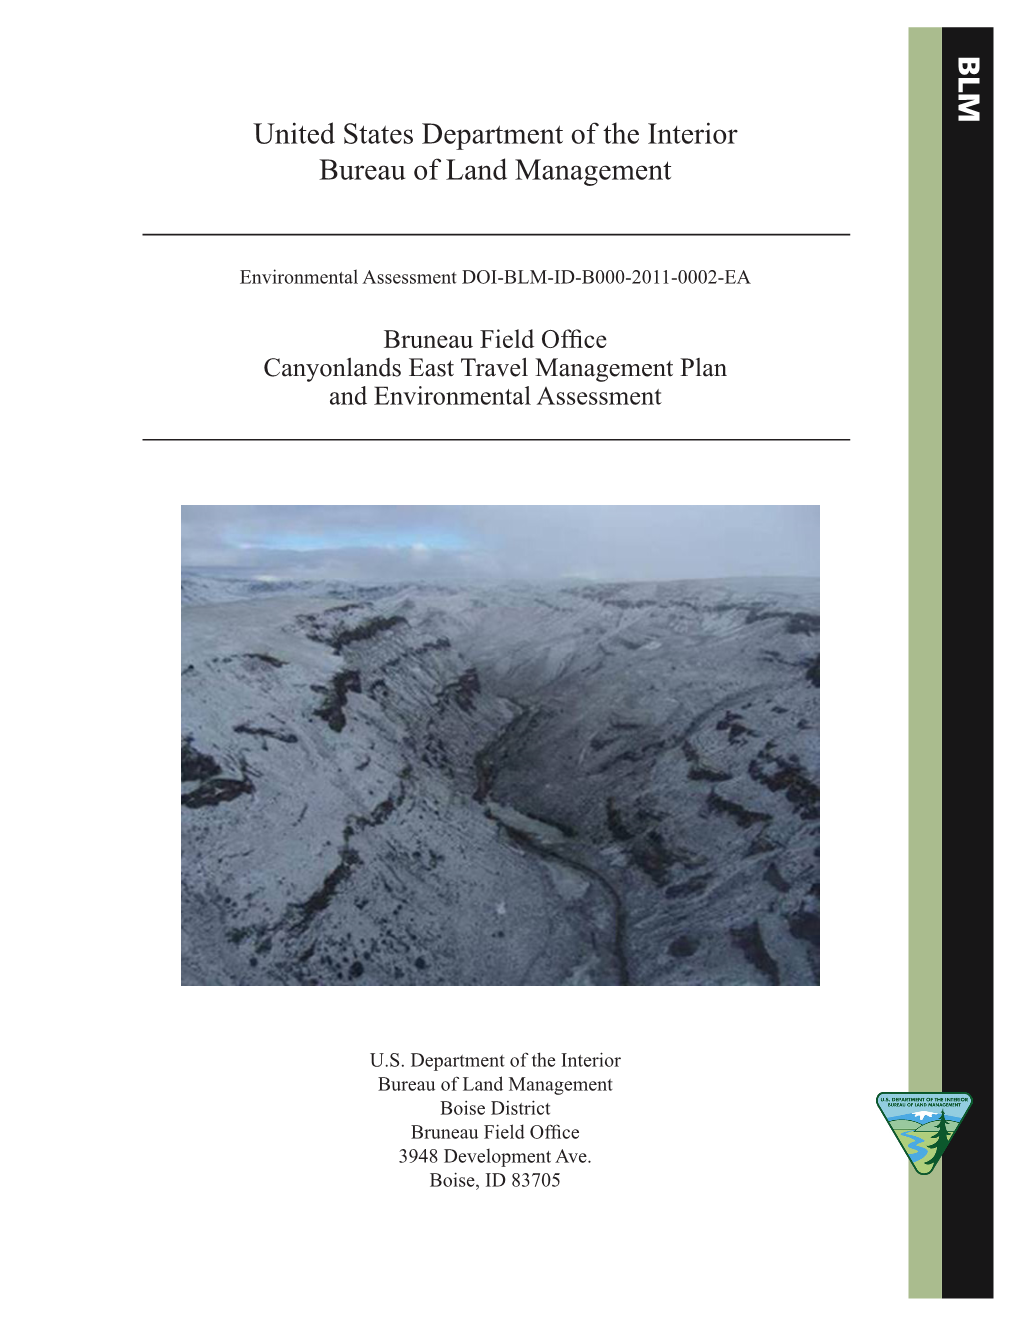 Canyonlands East Travel Management Plan and Environmental Assessment